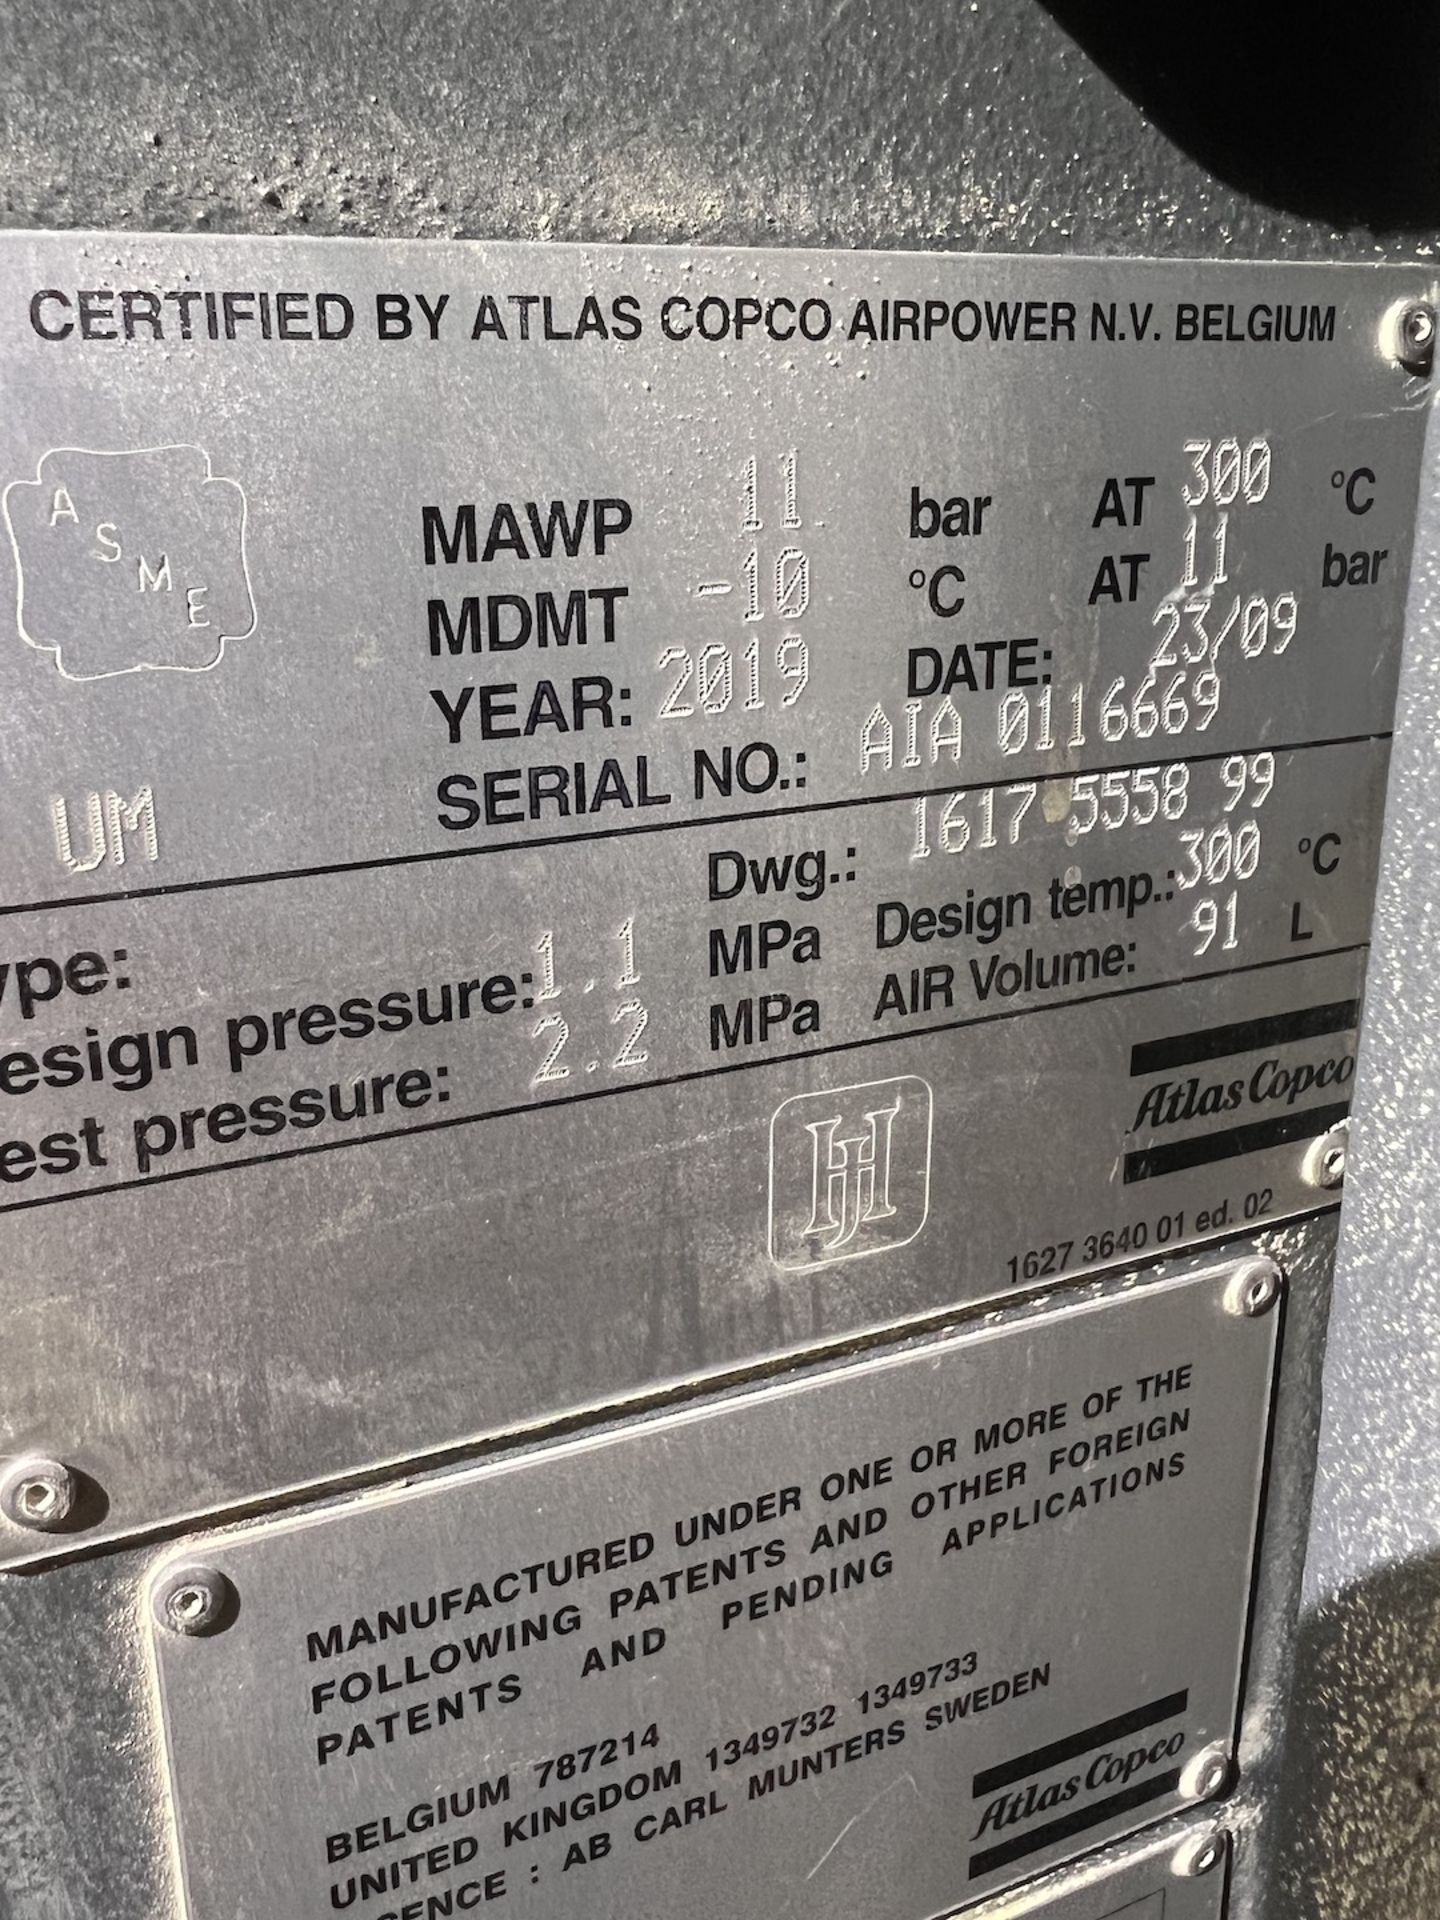 2019 ATLAS COPCO AIR COMPRESSOR, MODEL ZT90VSD-FF, S/N AIA 0116669, APPROX. 17,404 HOURS, IMD 260 - Image 22 of 26